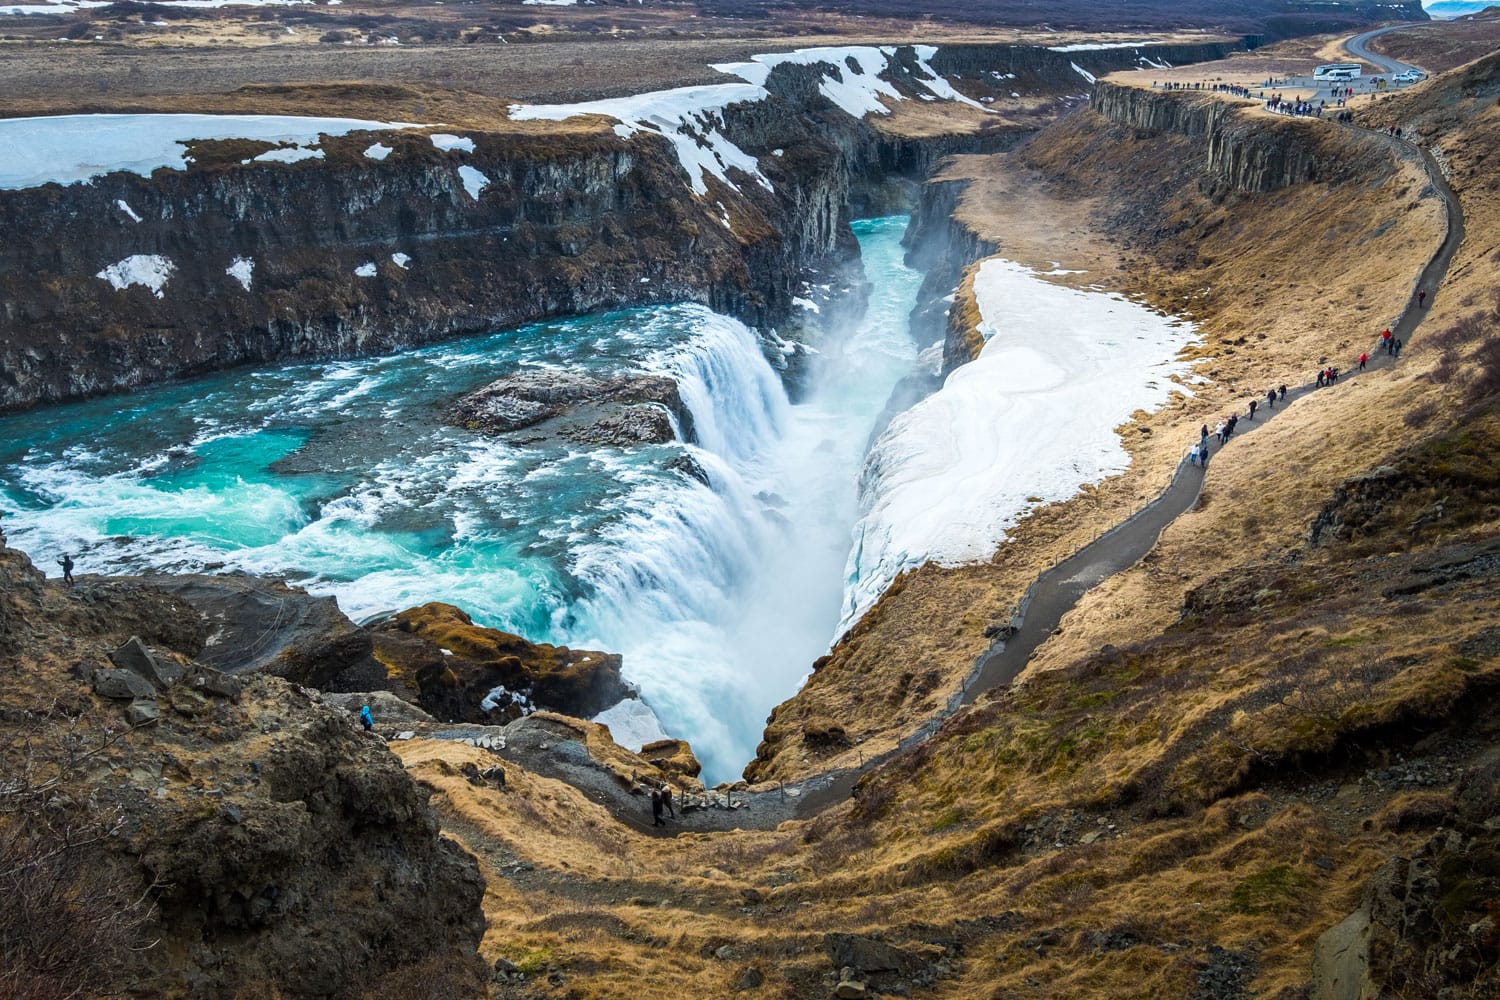 Gullfoss is a waterfall located in southwest Iceland